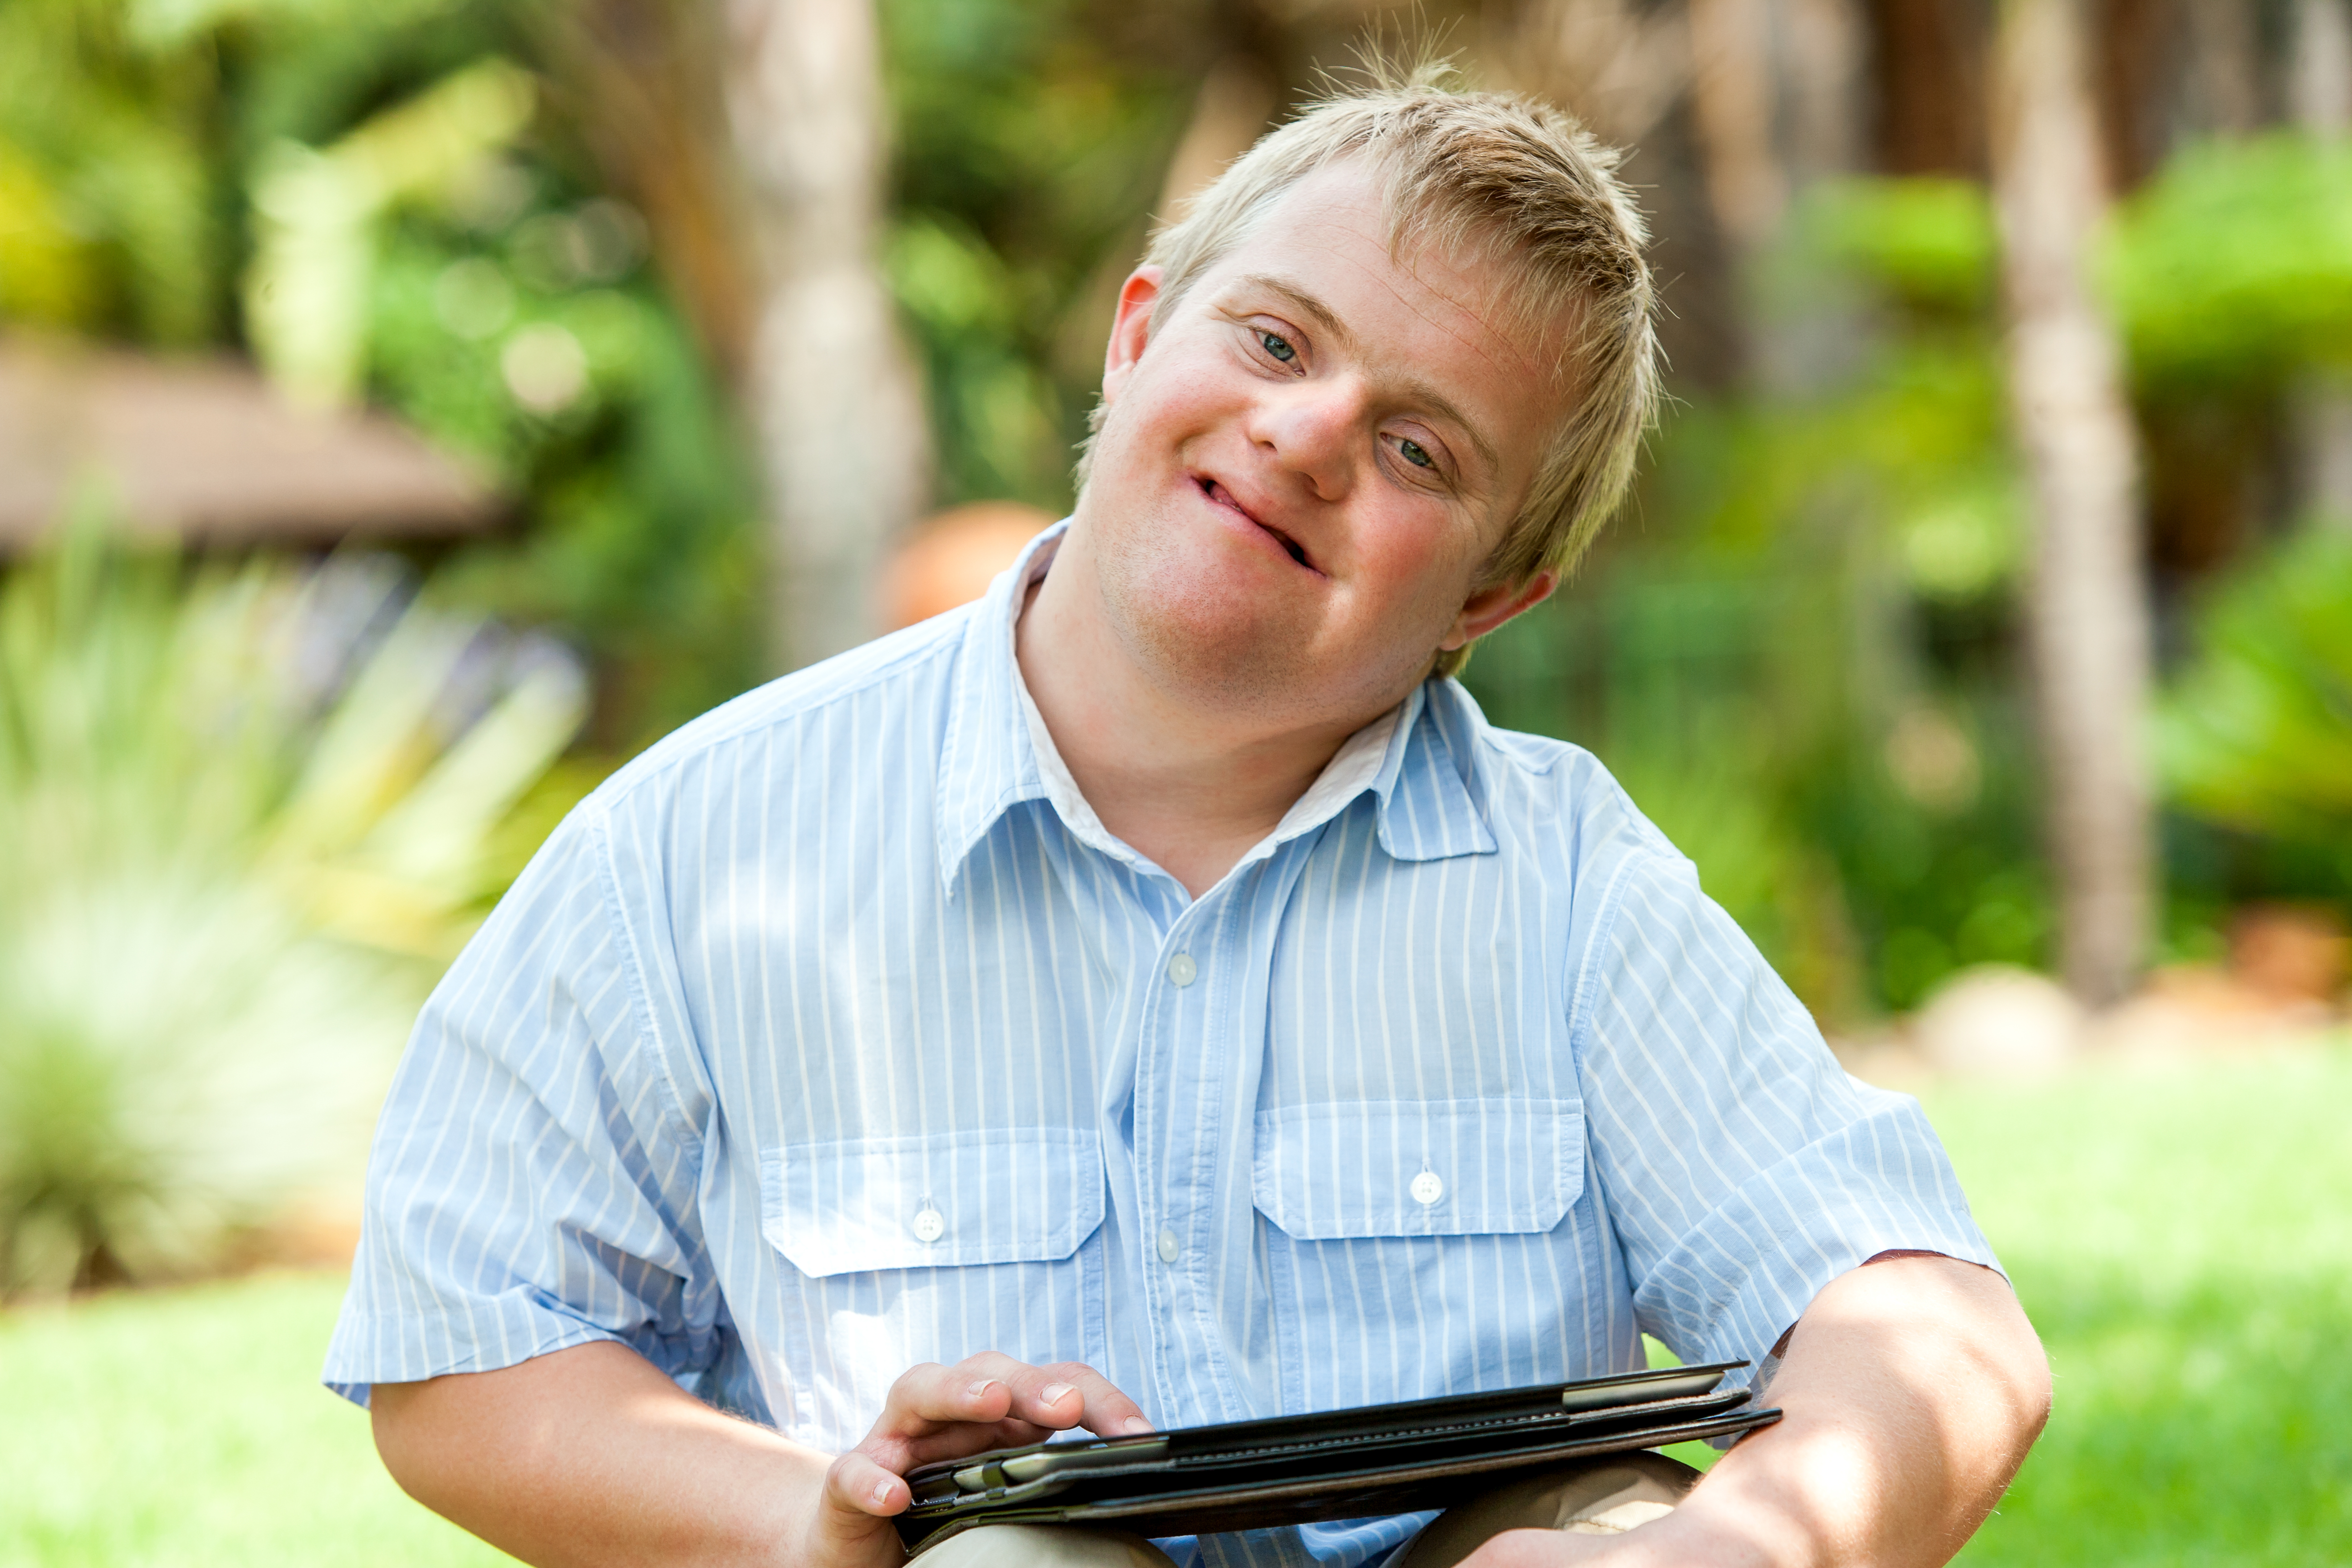 Close up portrait of handicapped boy playing on digital tablet outdoors.